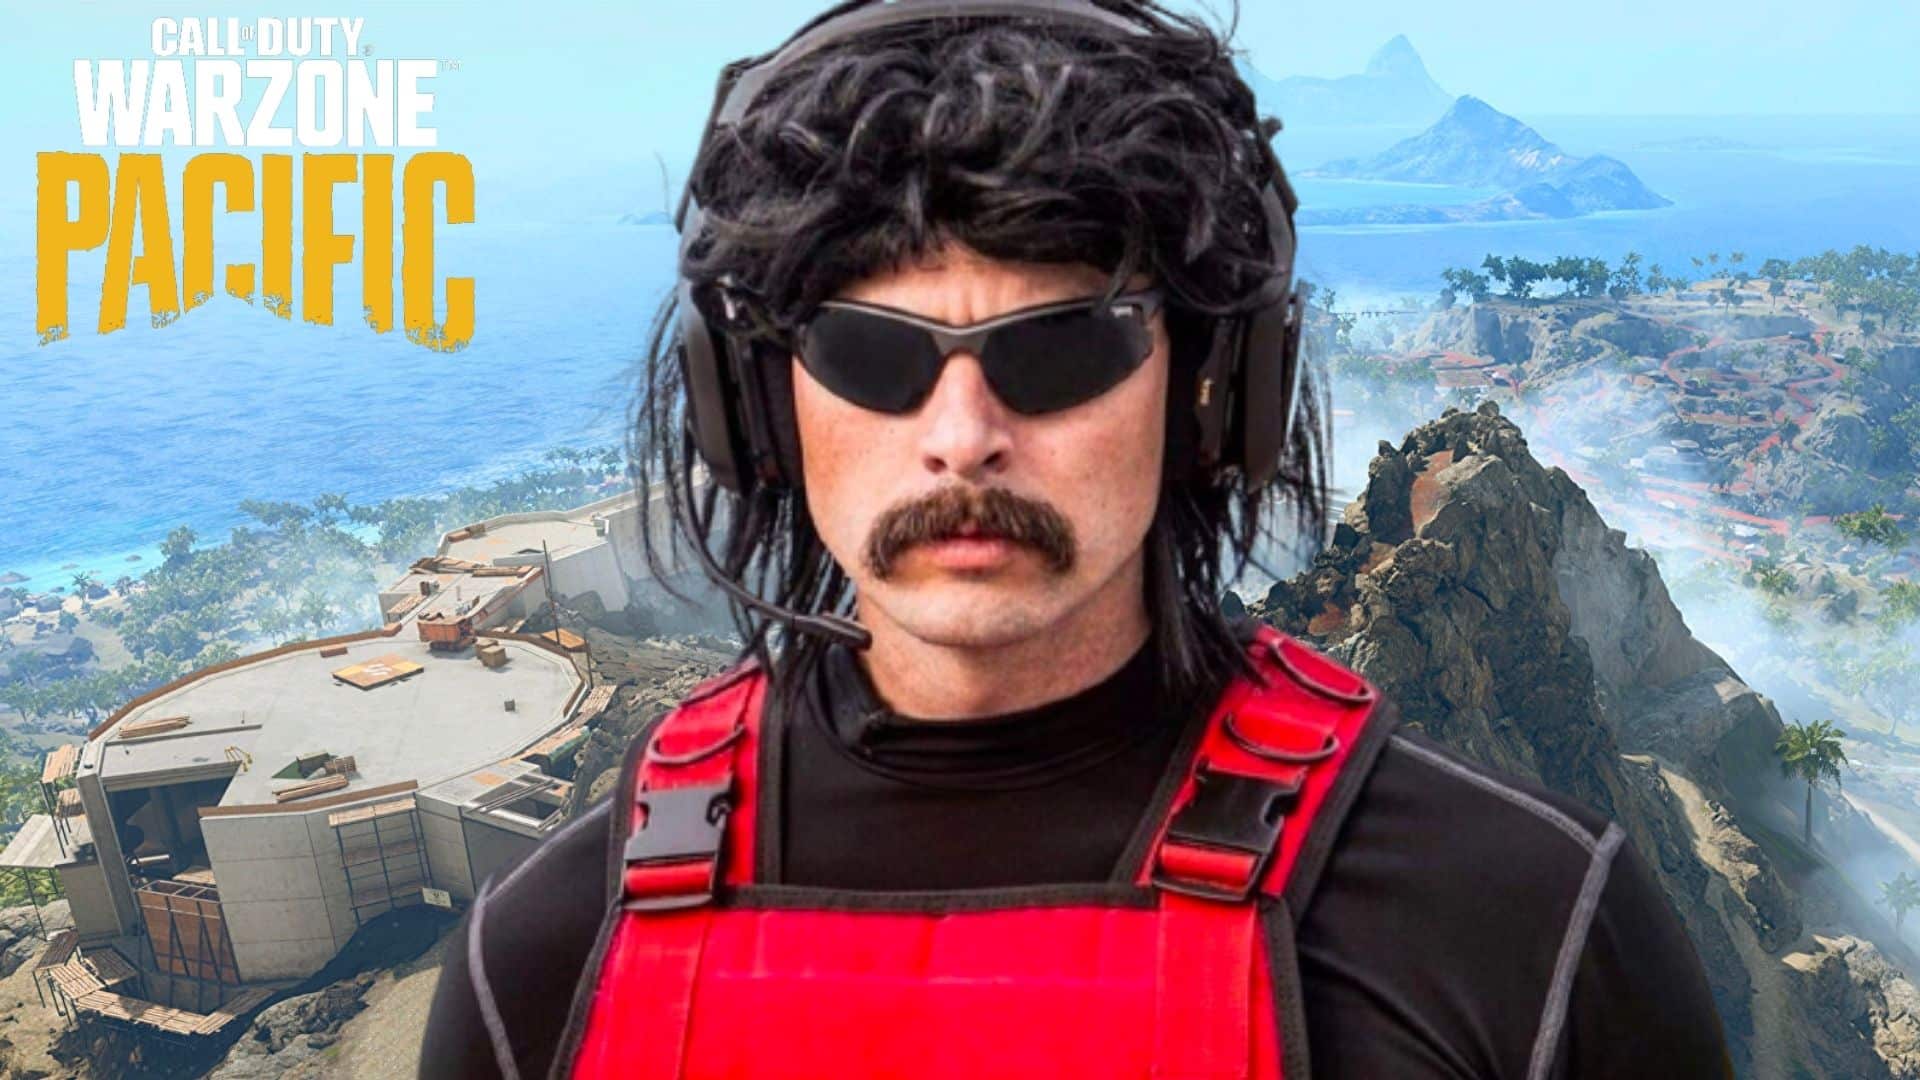 Dr Disrespect in glasses and wig on top of Warzone Pacific Caldera map